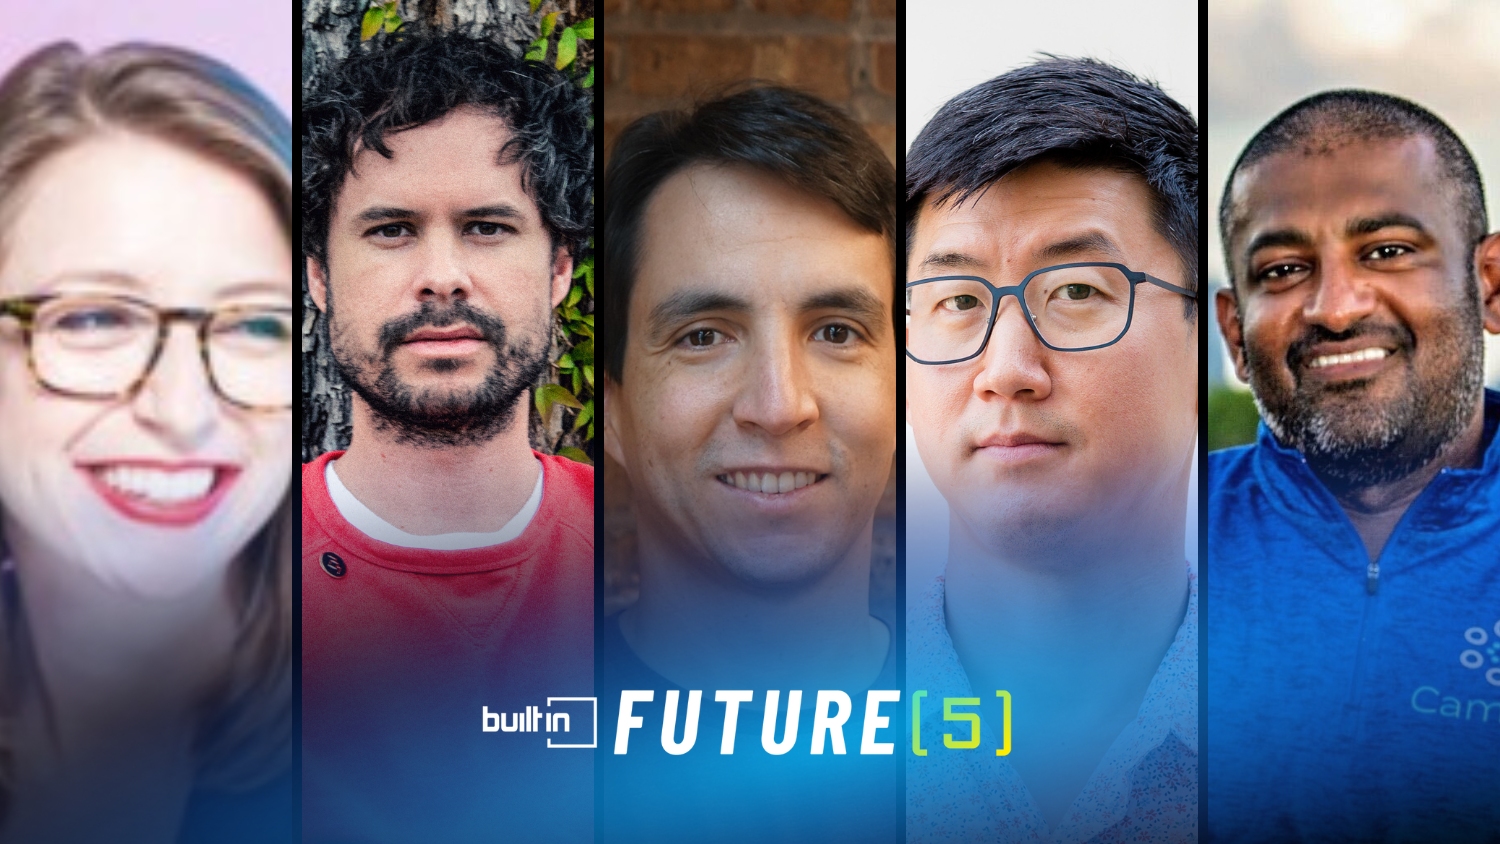 Chicago tech founders featured in this quarter’s Built In Future 5 series.